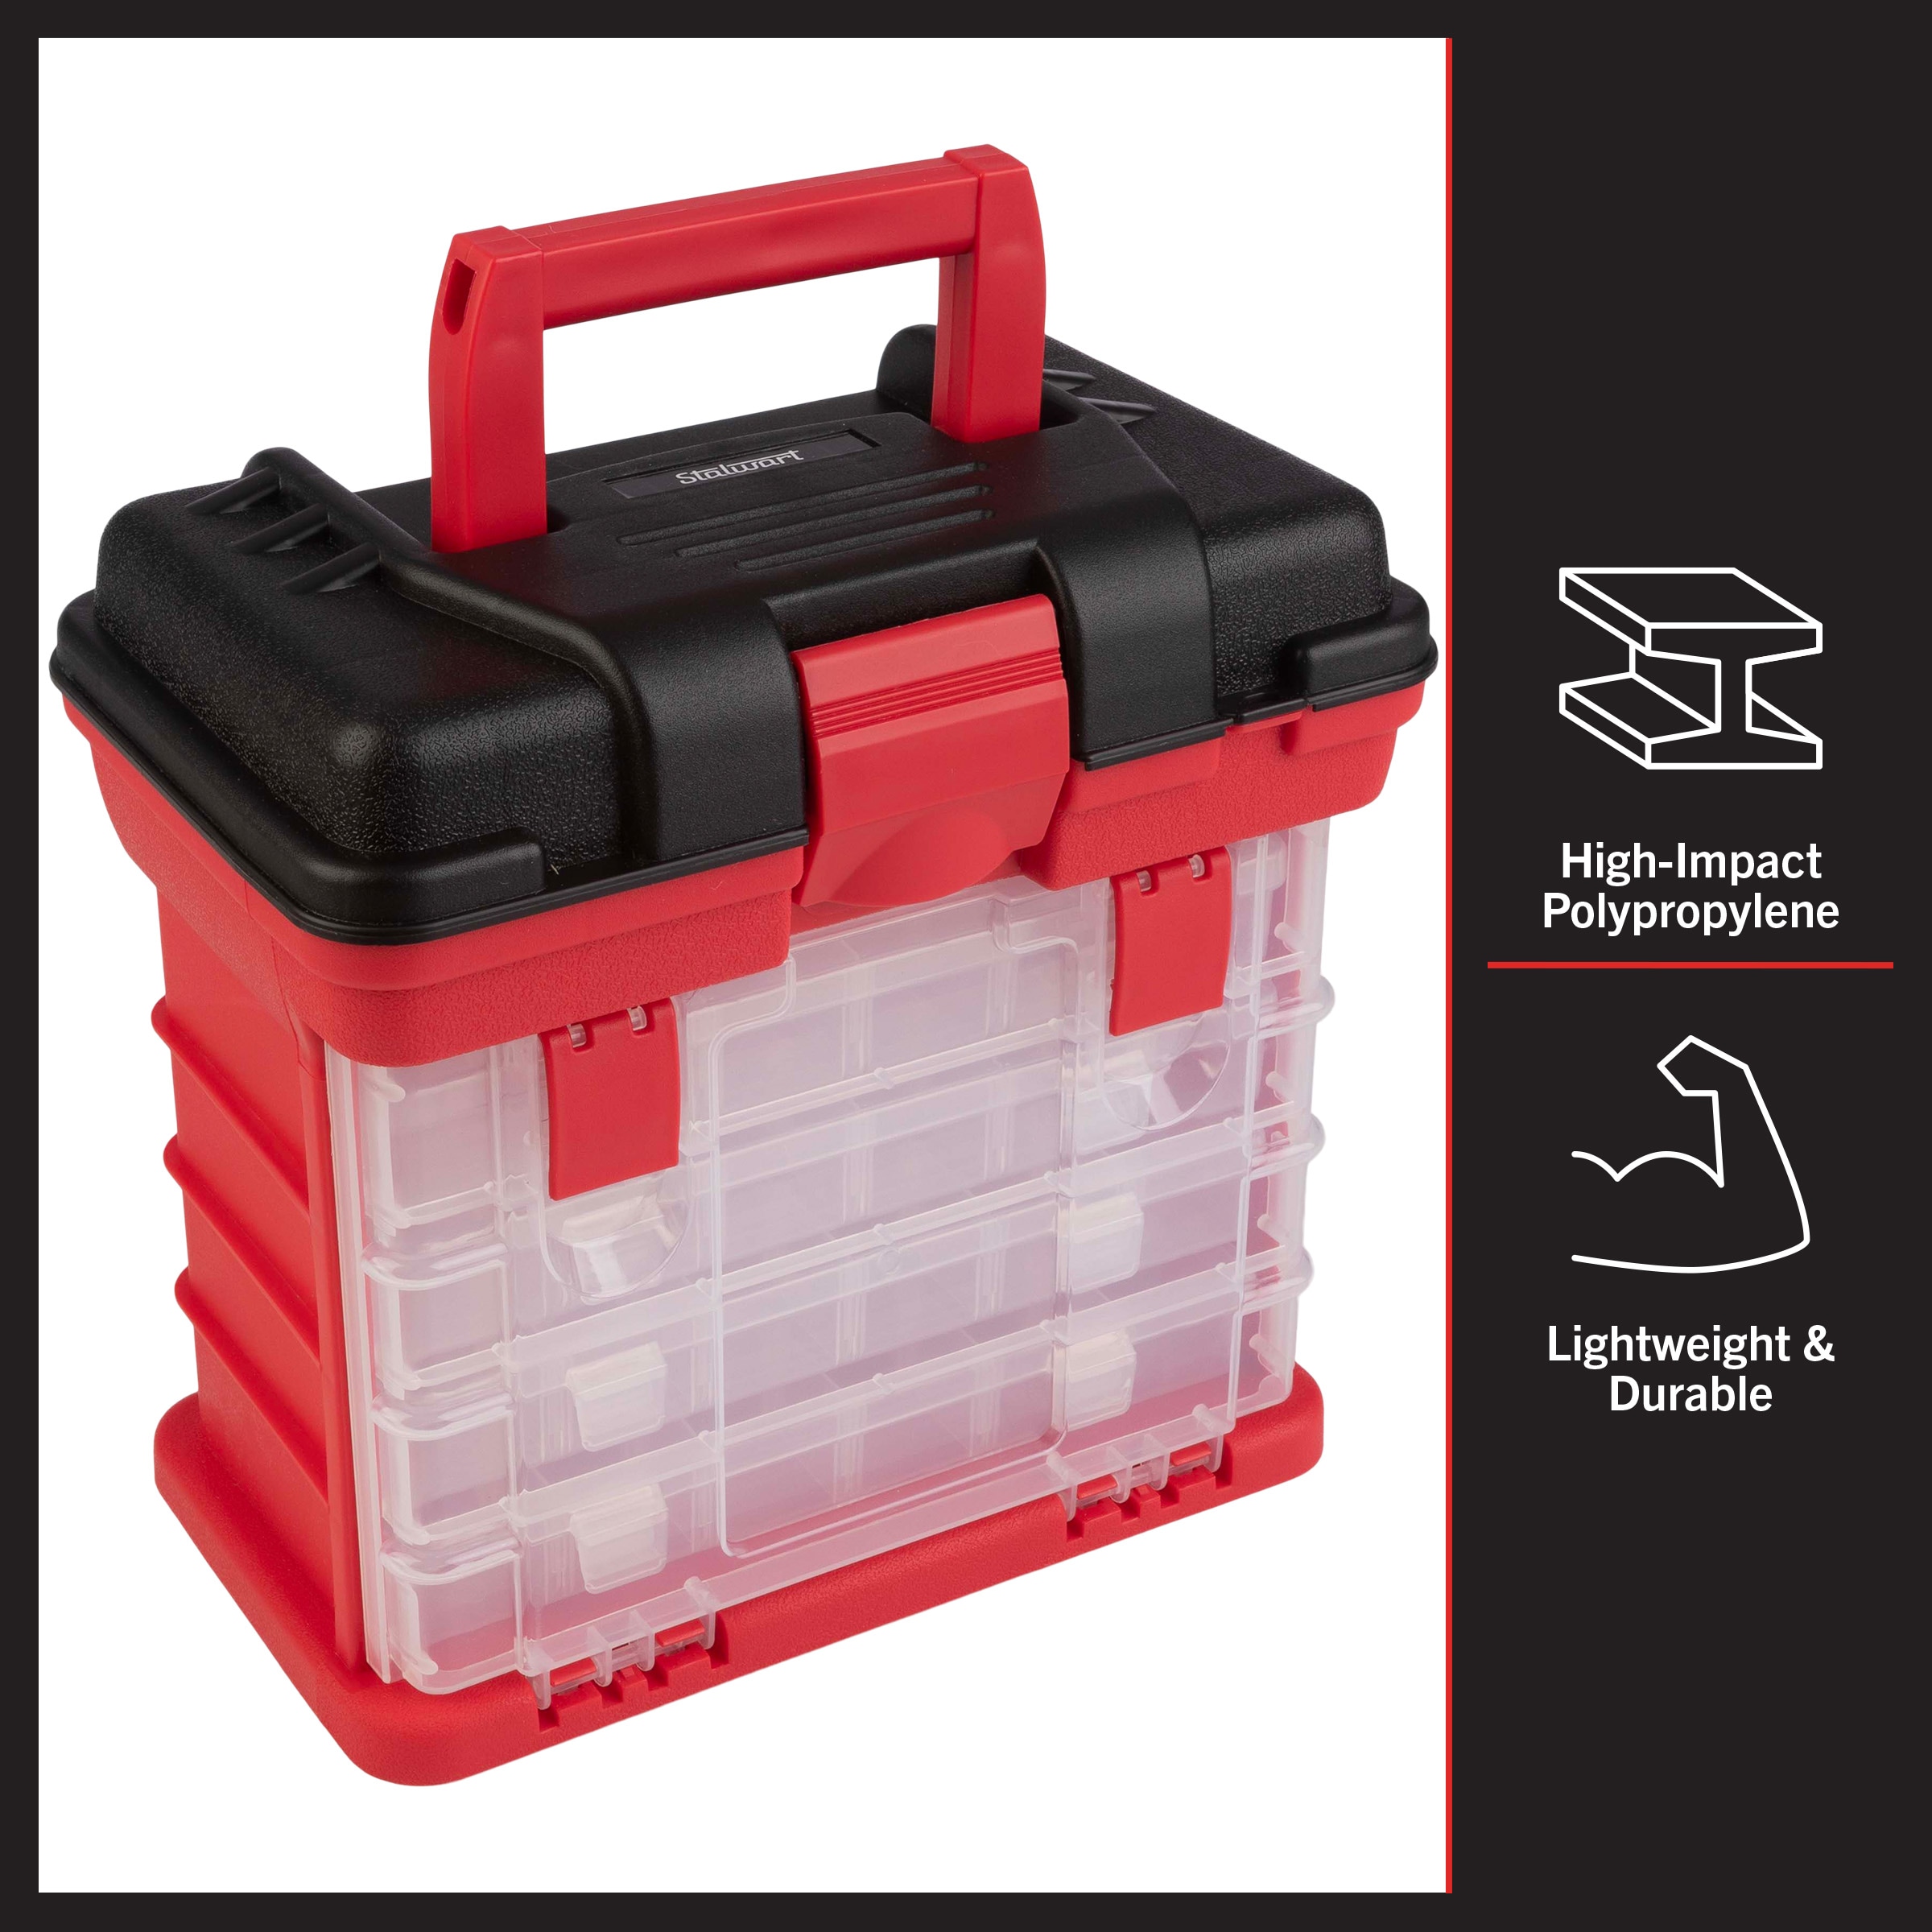 Stalwart Storage Organizer Tool Box - Clear Top Plastic Organizers for  Parts, Crafts, and Hardware